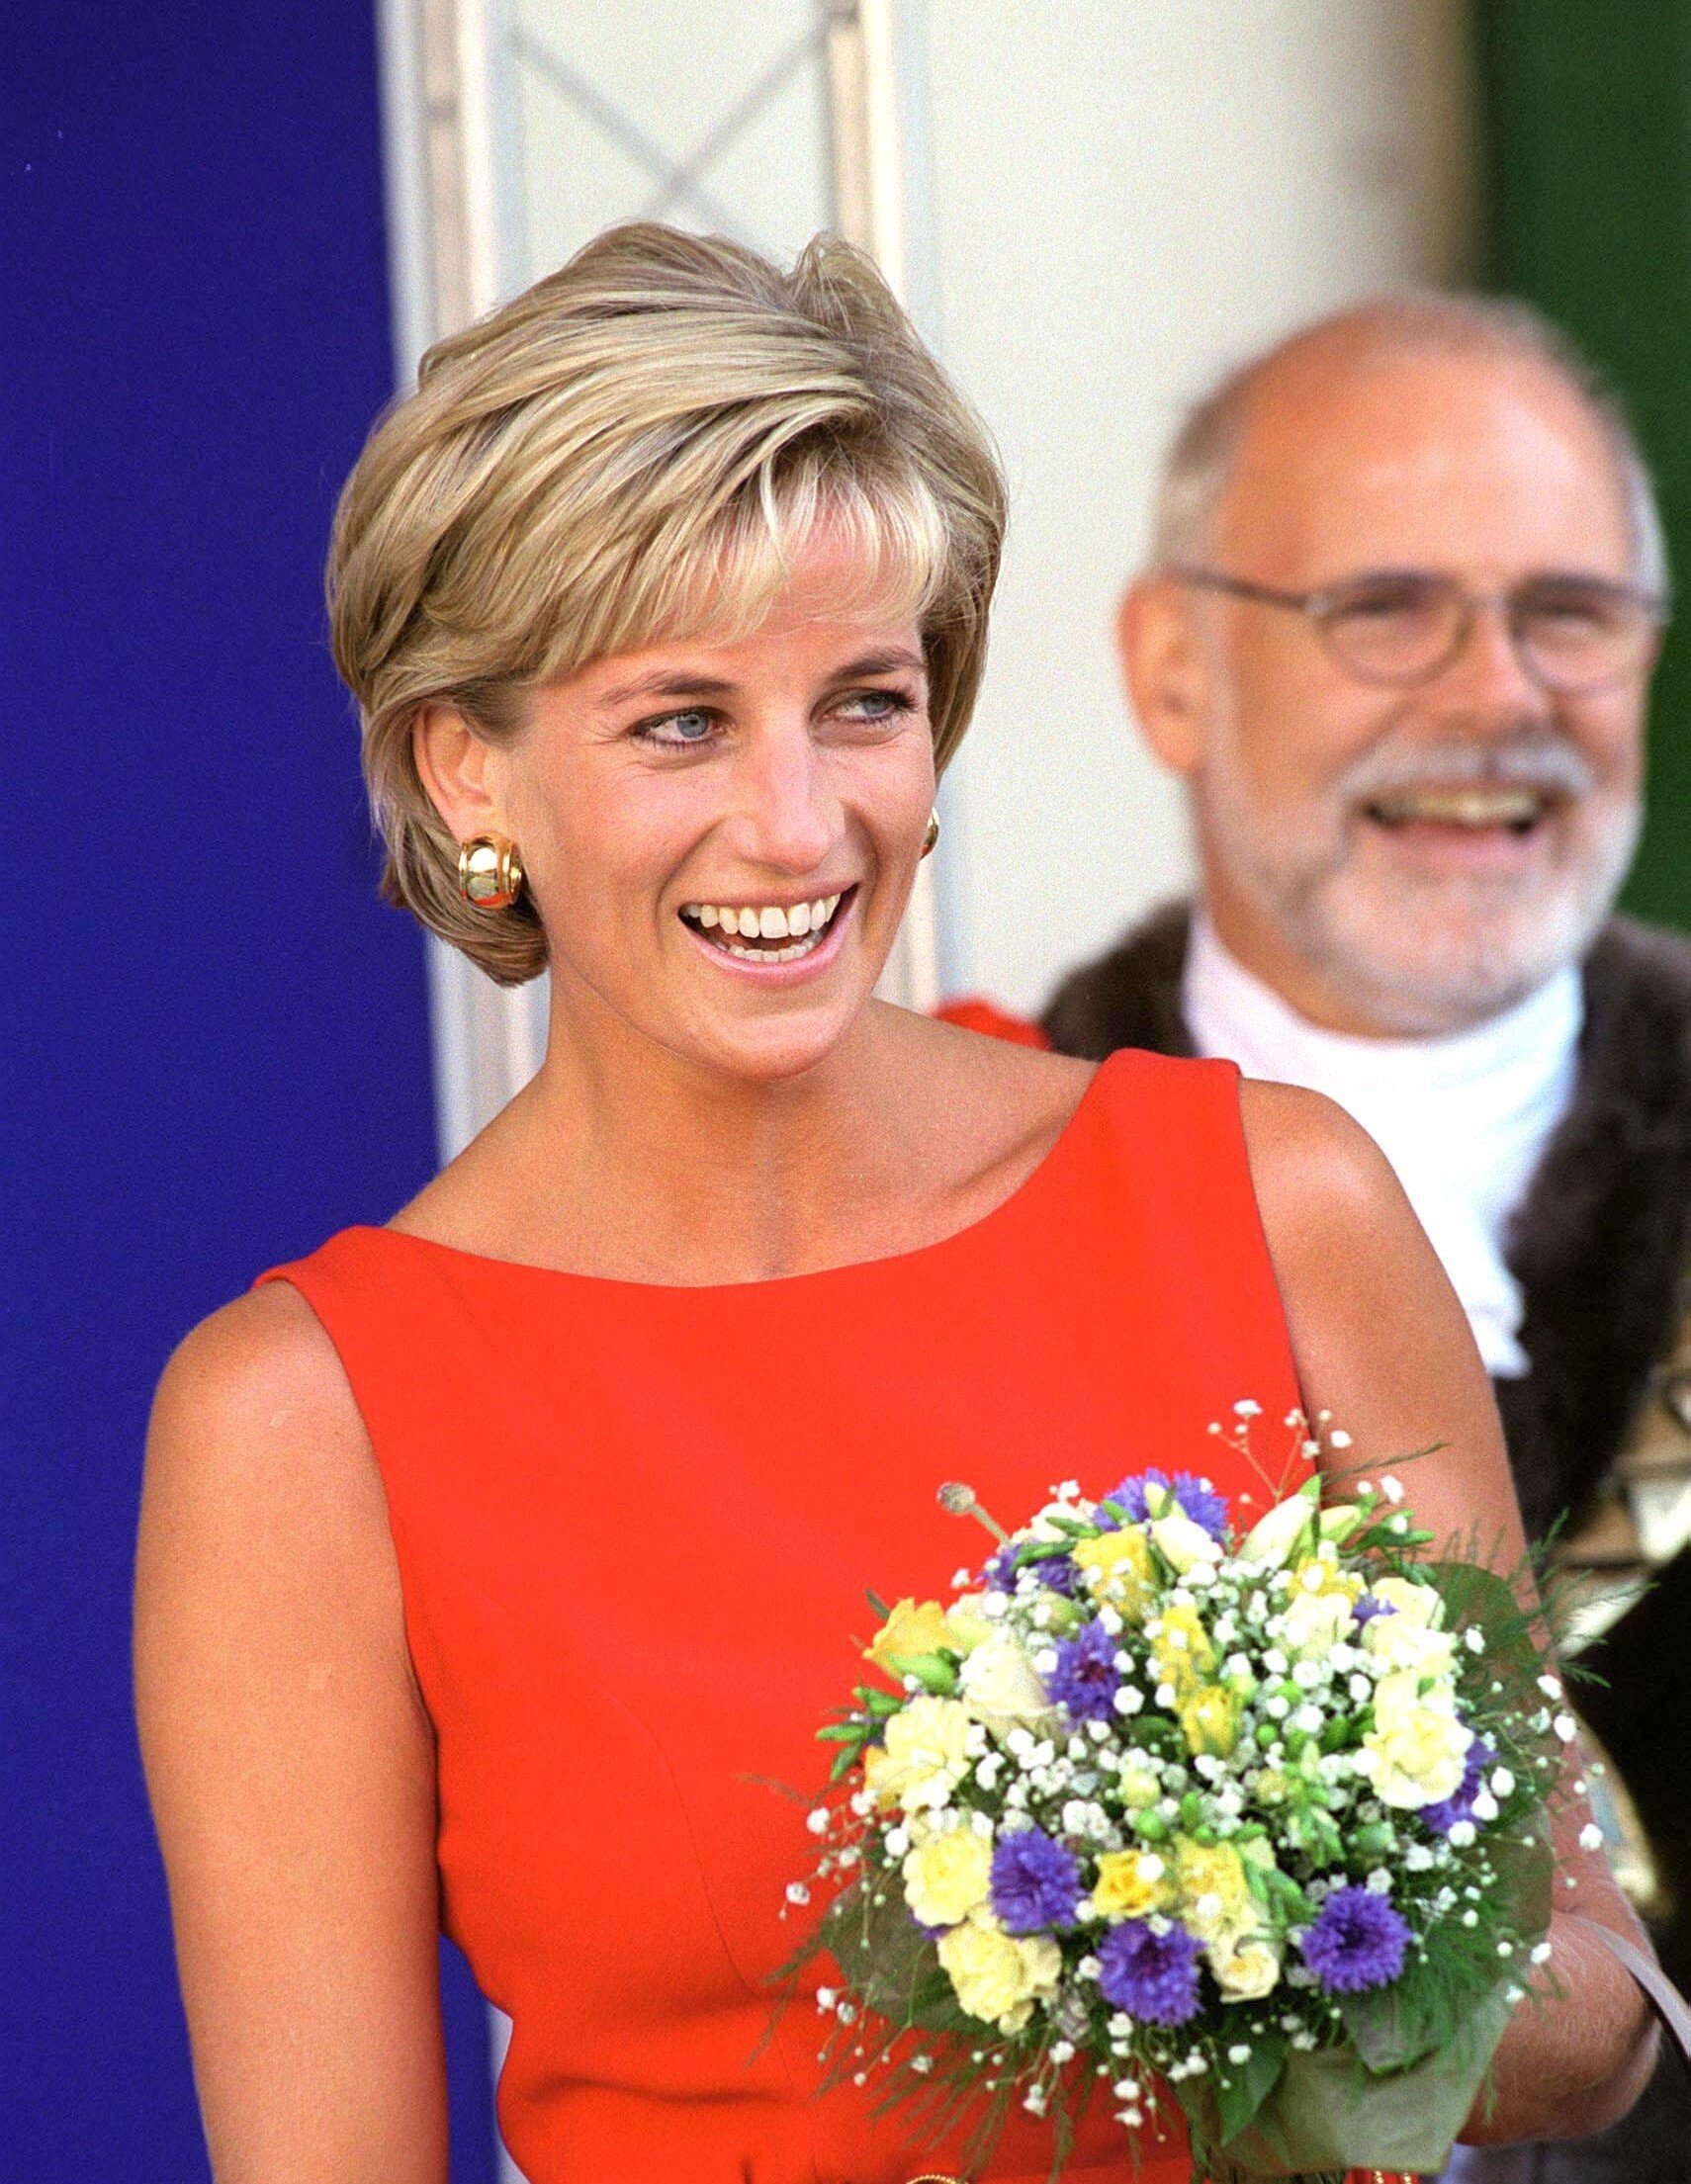 Princess Diana, who had a 'taboo' relationship with her staff, laughing while holding a bouquet of flowers during an official visit